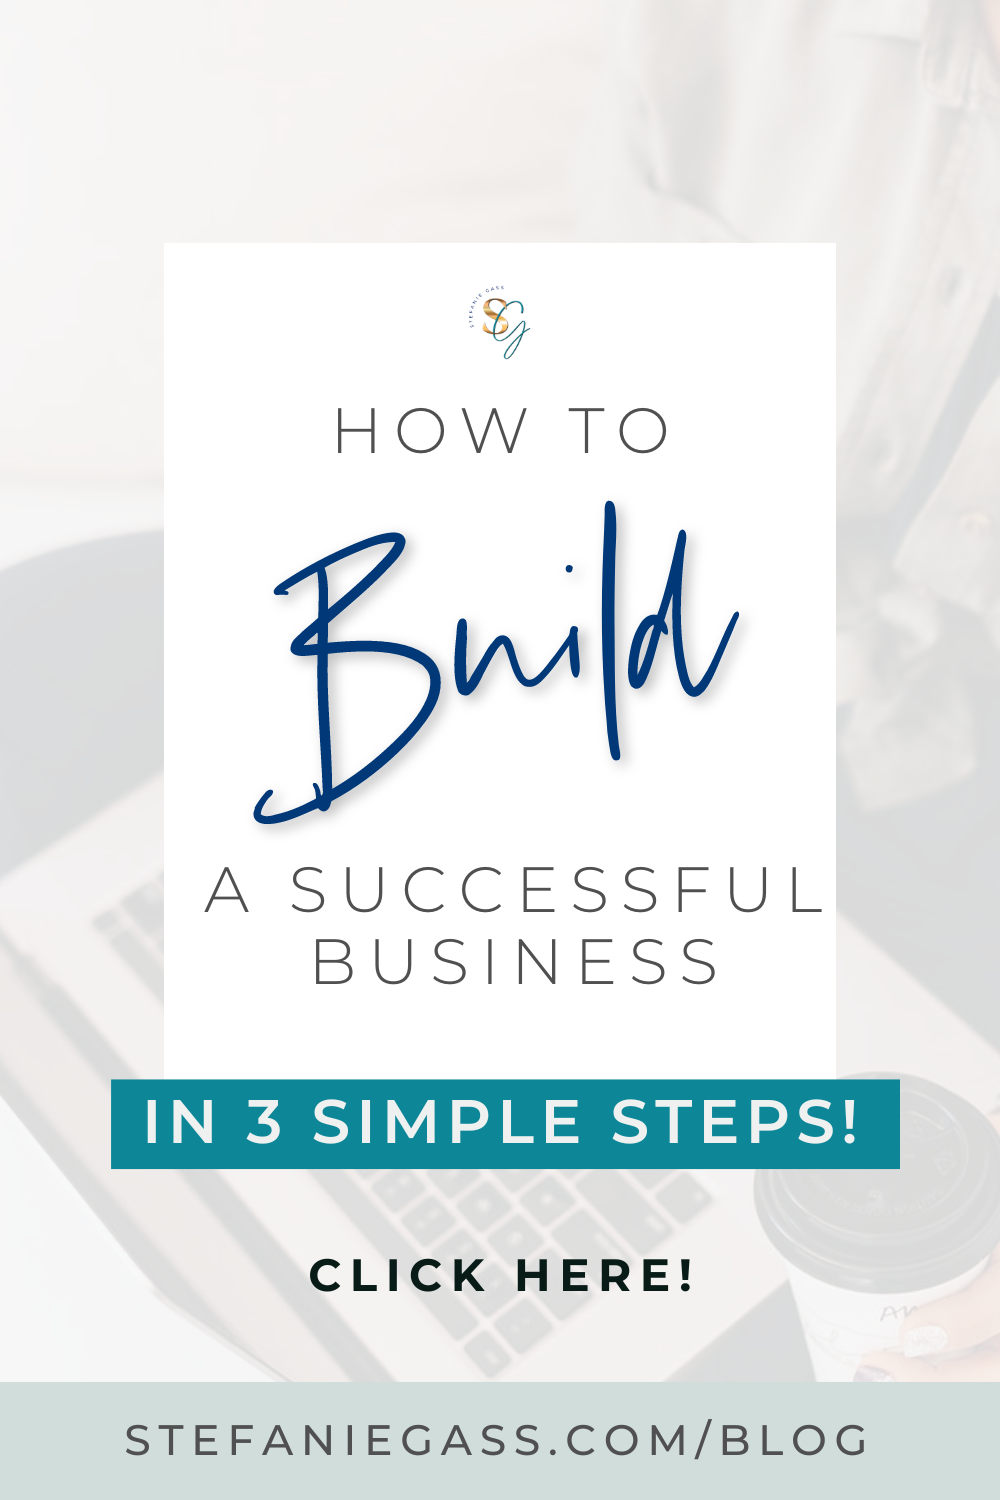 Text states " How to build a successful business in 3 simple steps!"